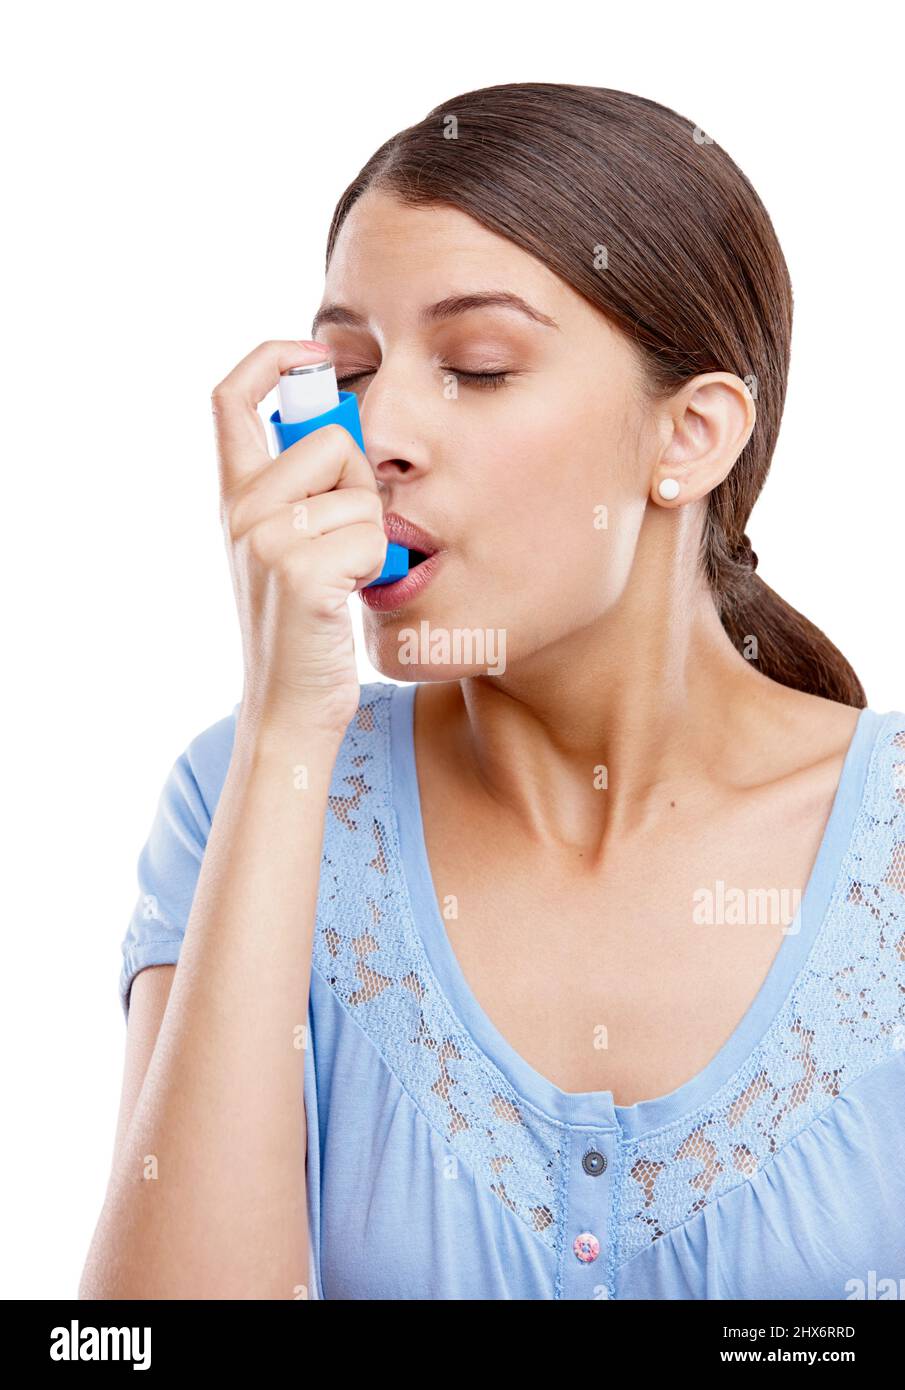 Luckily she had her inhaler with her. Studio shot of an attractive young woman using an asthma inhaler. Stock Photo